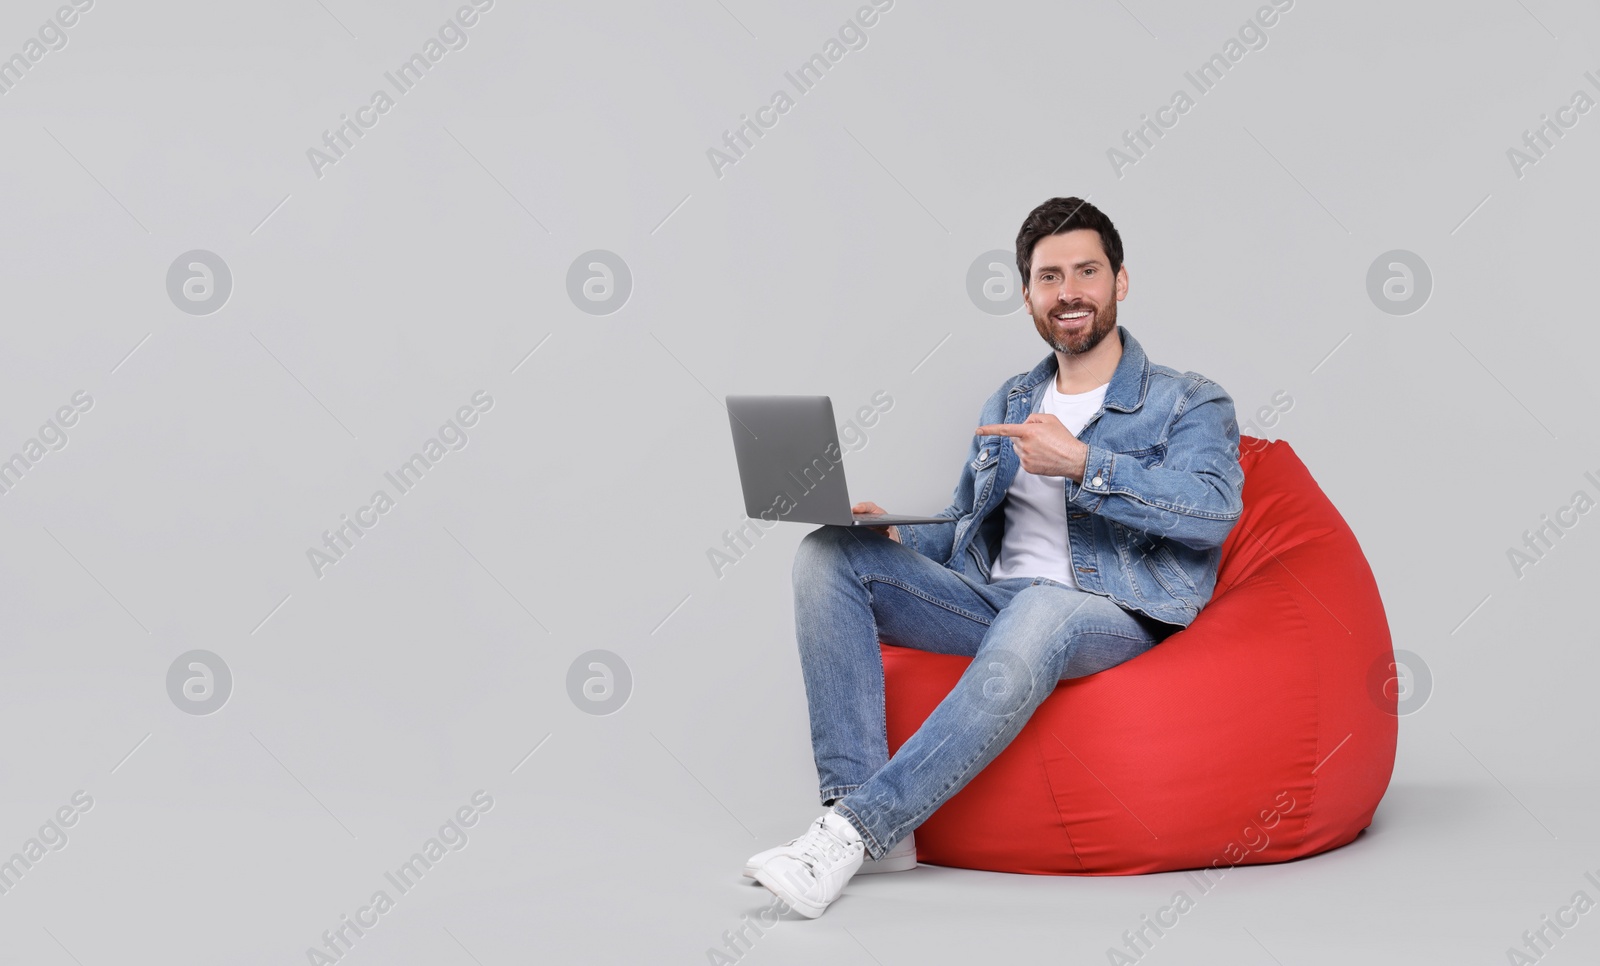 Photo of Happy man with laptop sitting on beanbag chair against light grey background